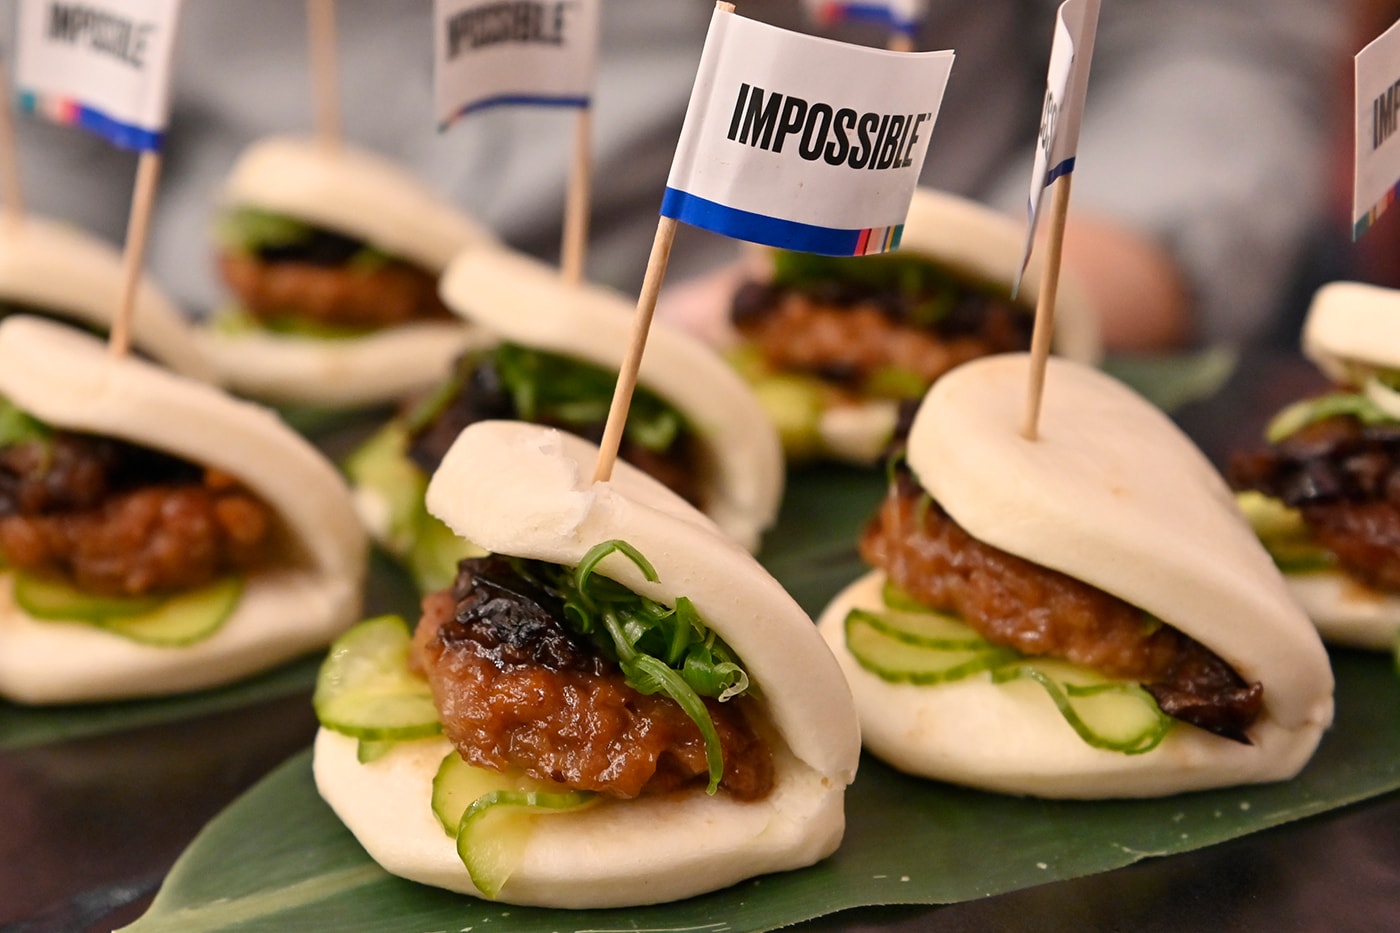 United Airlines Impossible Foods In-Flight Menu Launch announcement